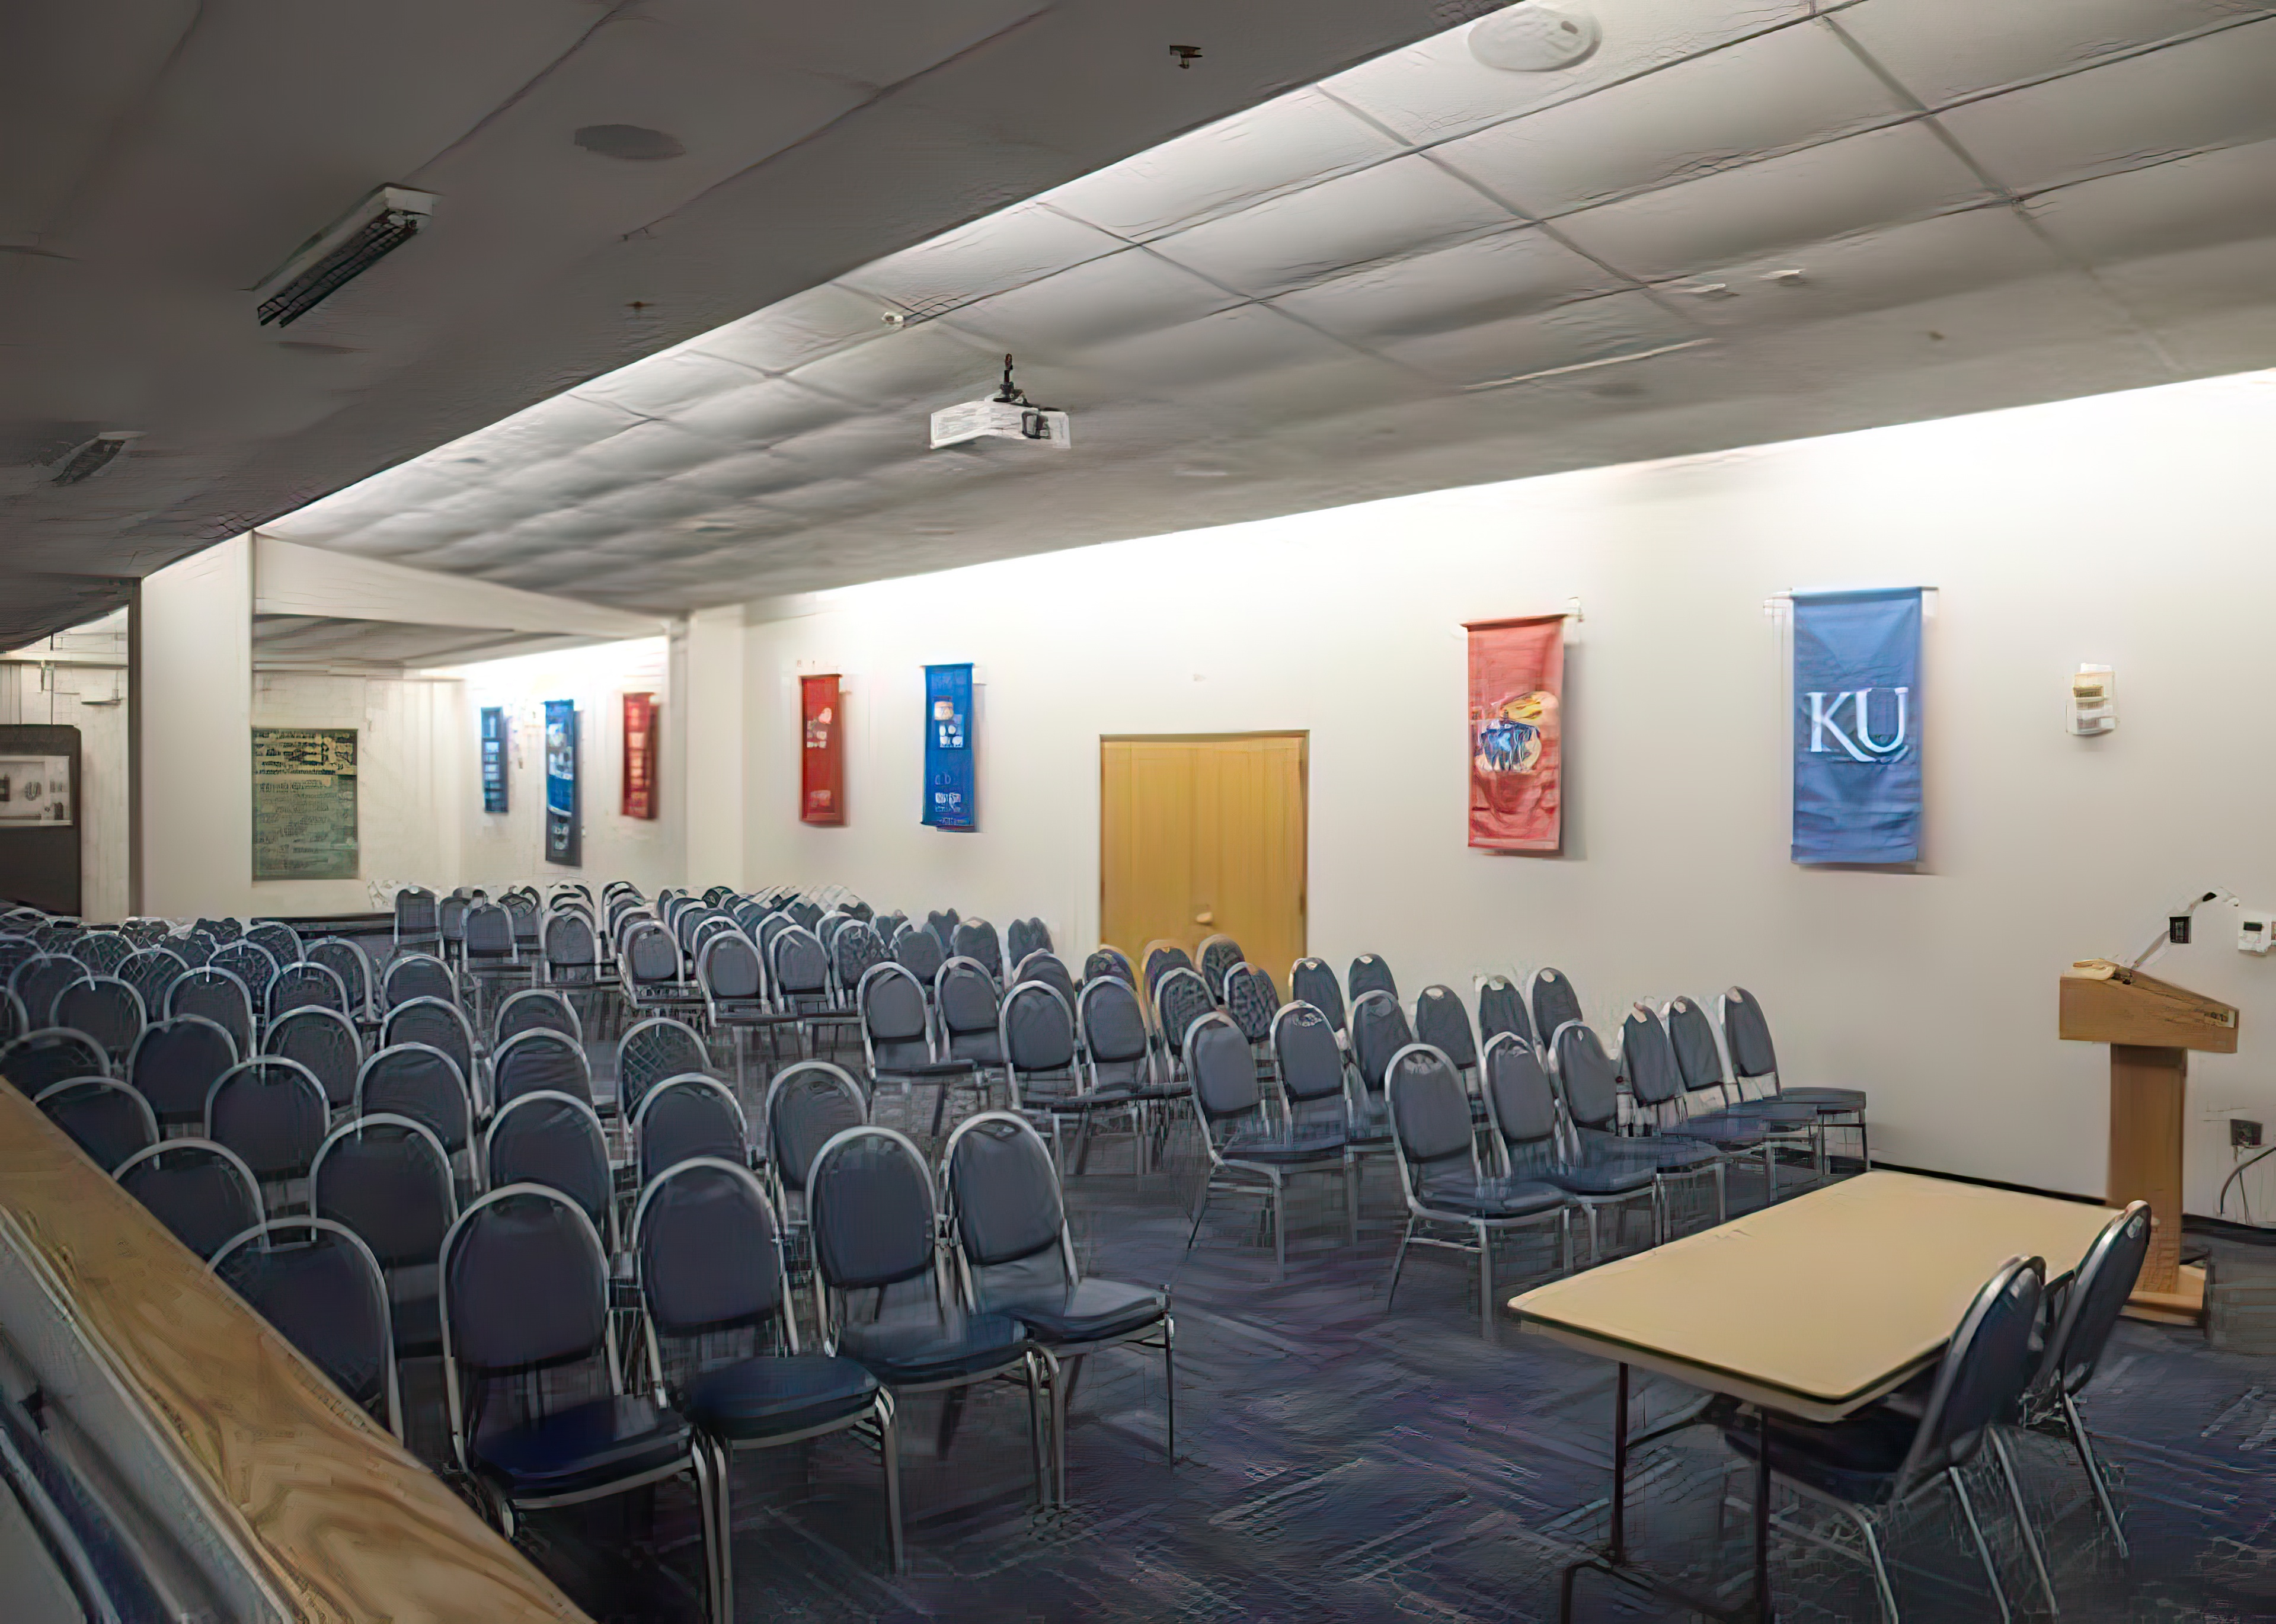 A room set up with chairs in rows, a table and podium in front, and KU banners hanging on the wall. 